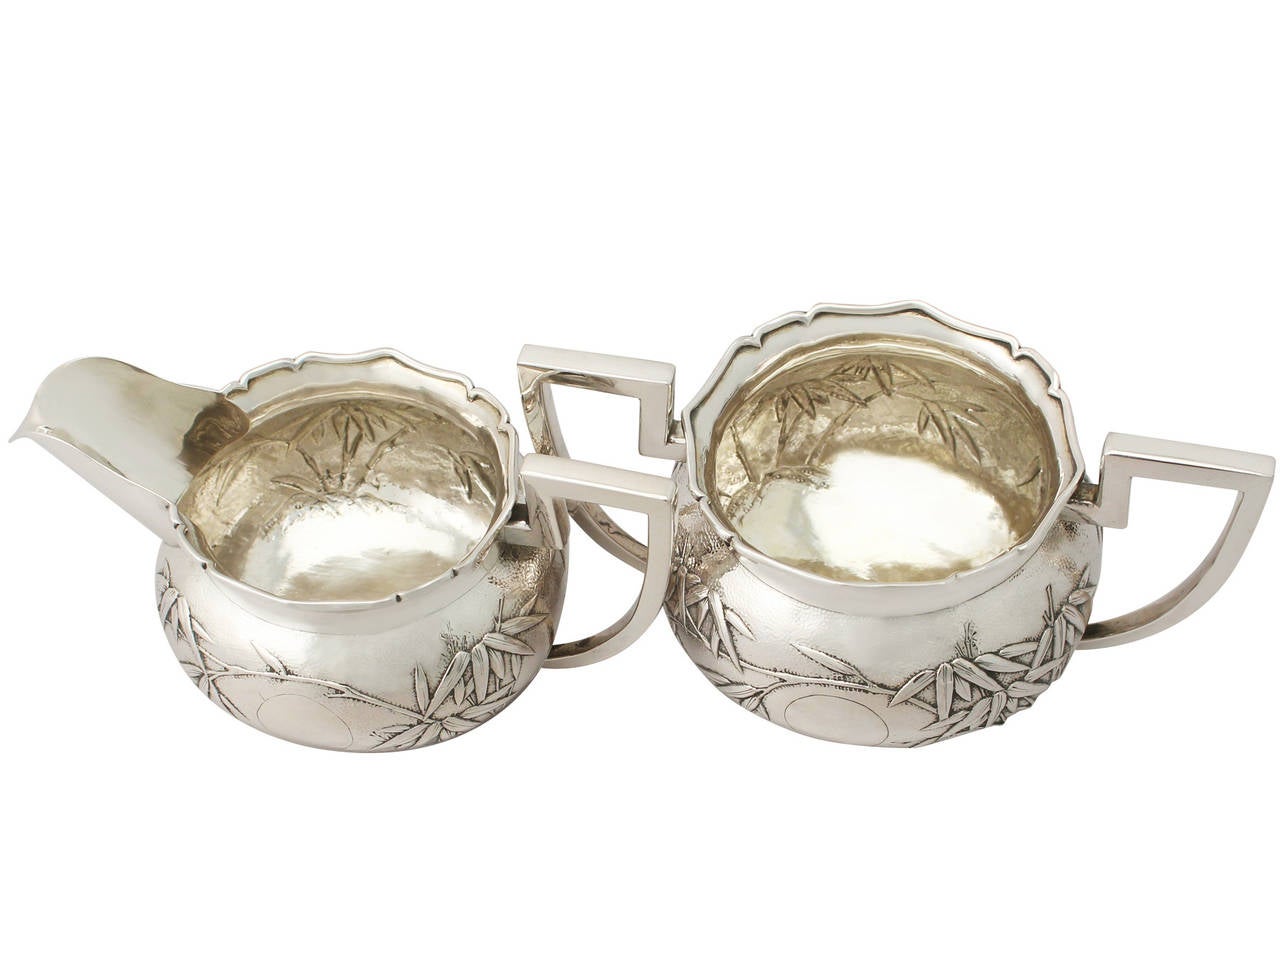 1900s Chinese Export Silver Cream Jug / Creamer and Sugar Bowl For Sale 4